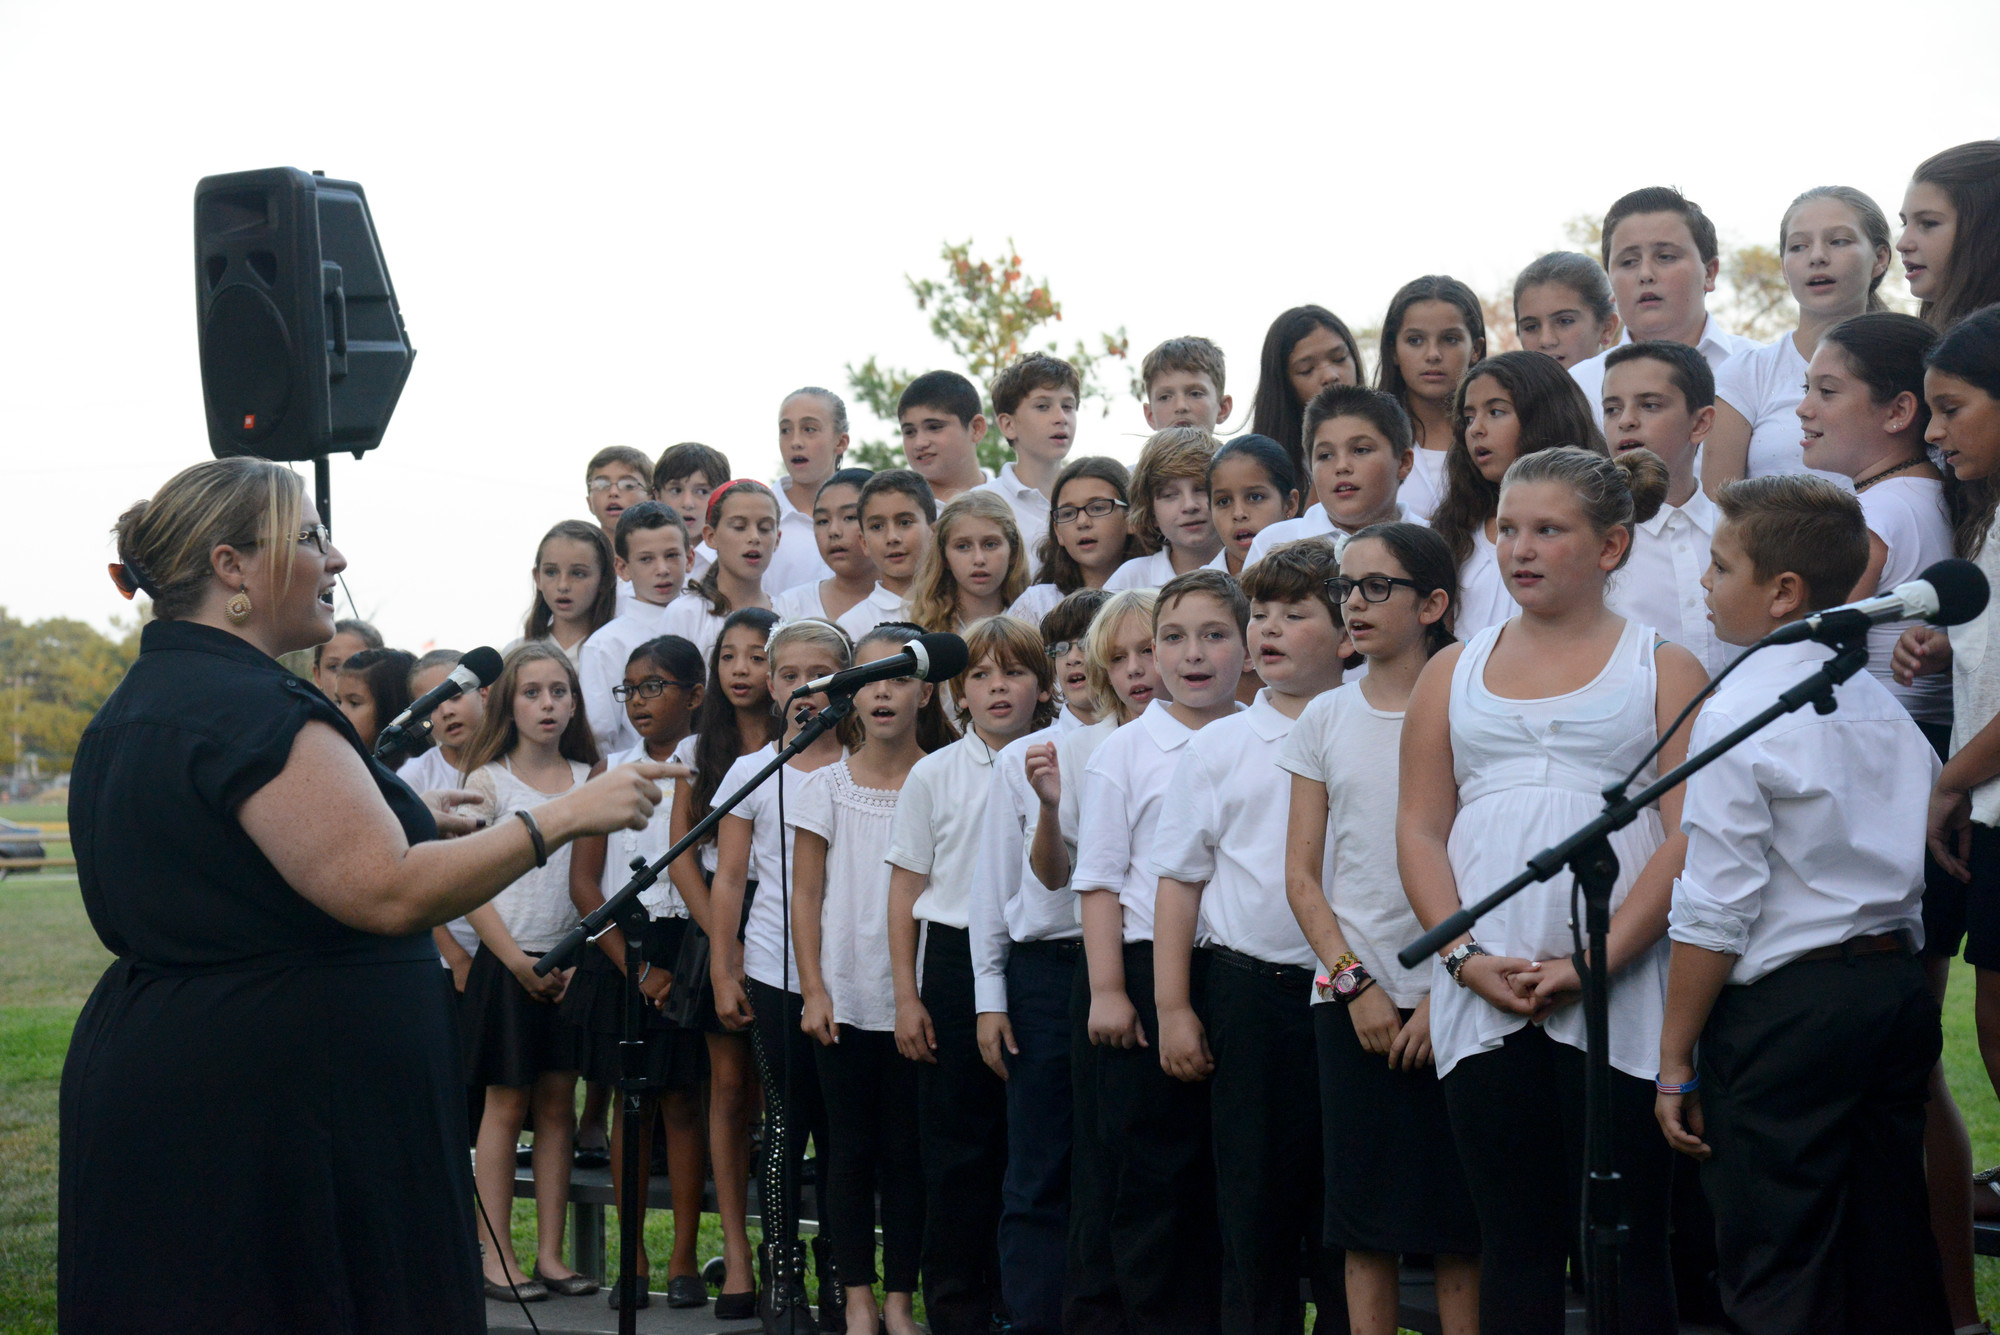 Erin Degnan directed the Boardman Elementary School chorus in “We Will” by Jim Papoulis.